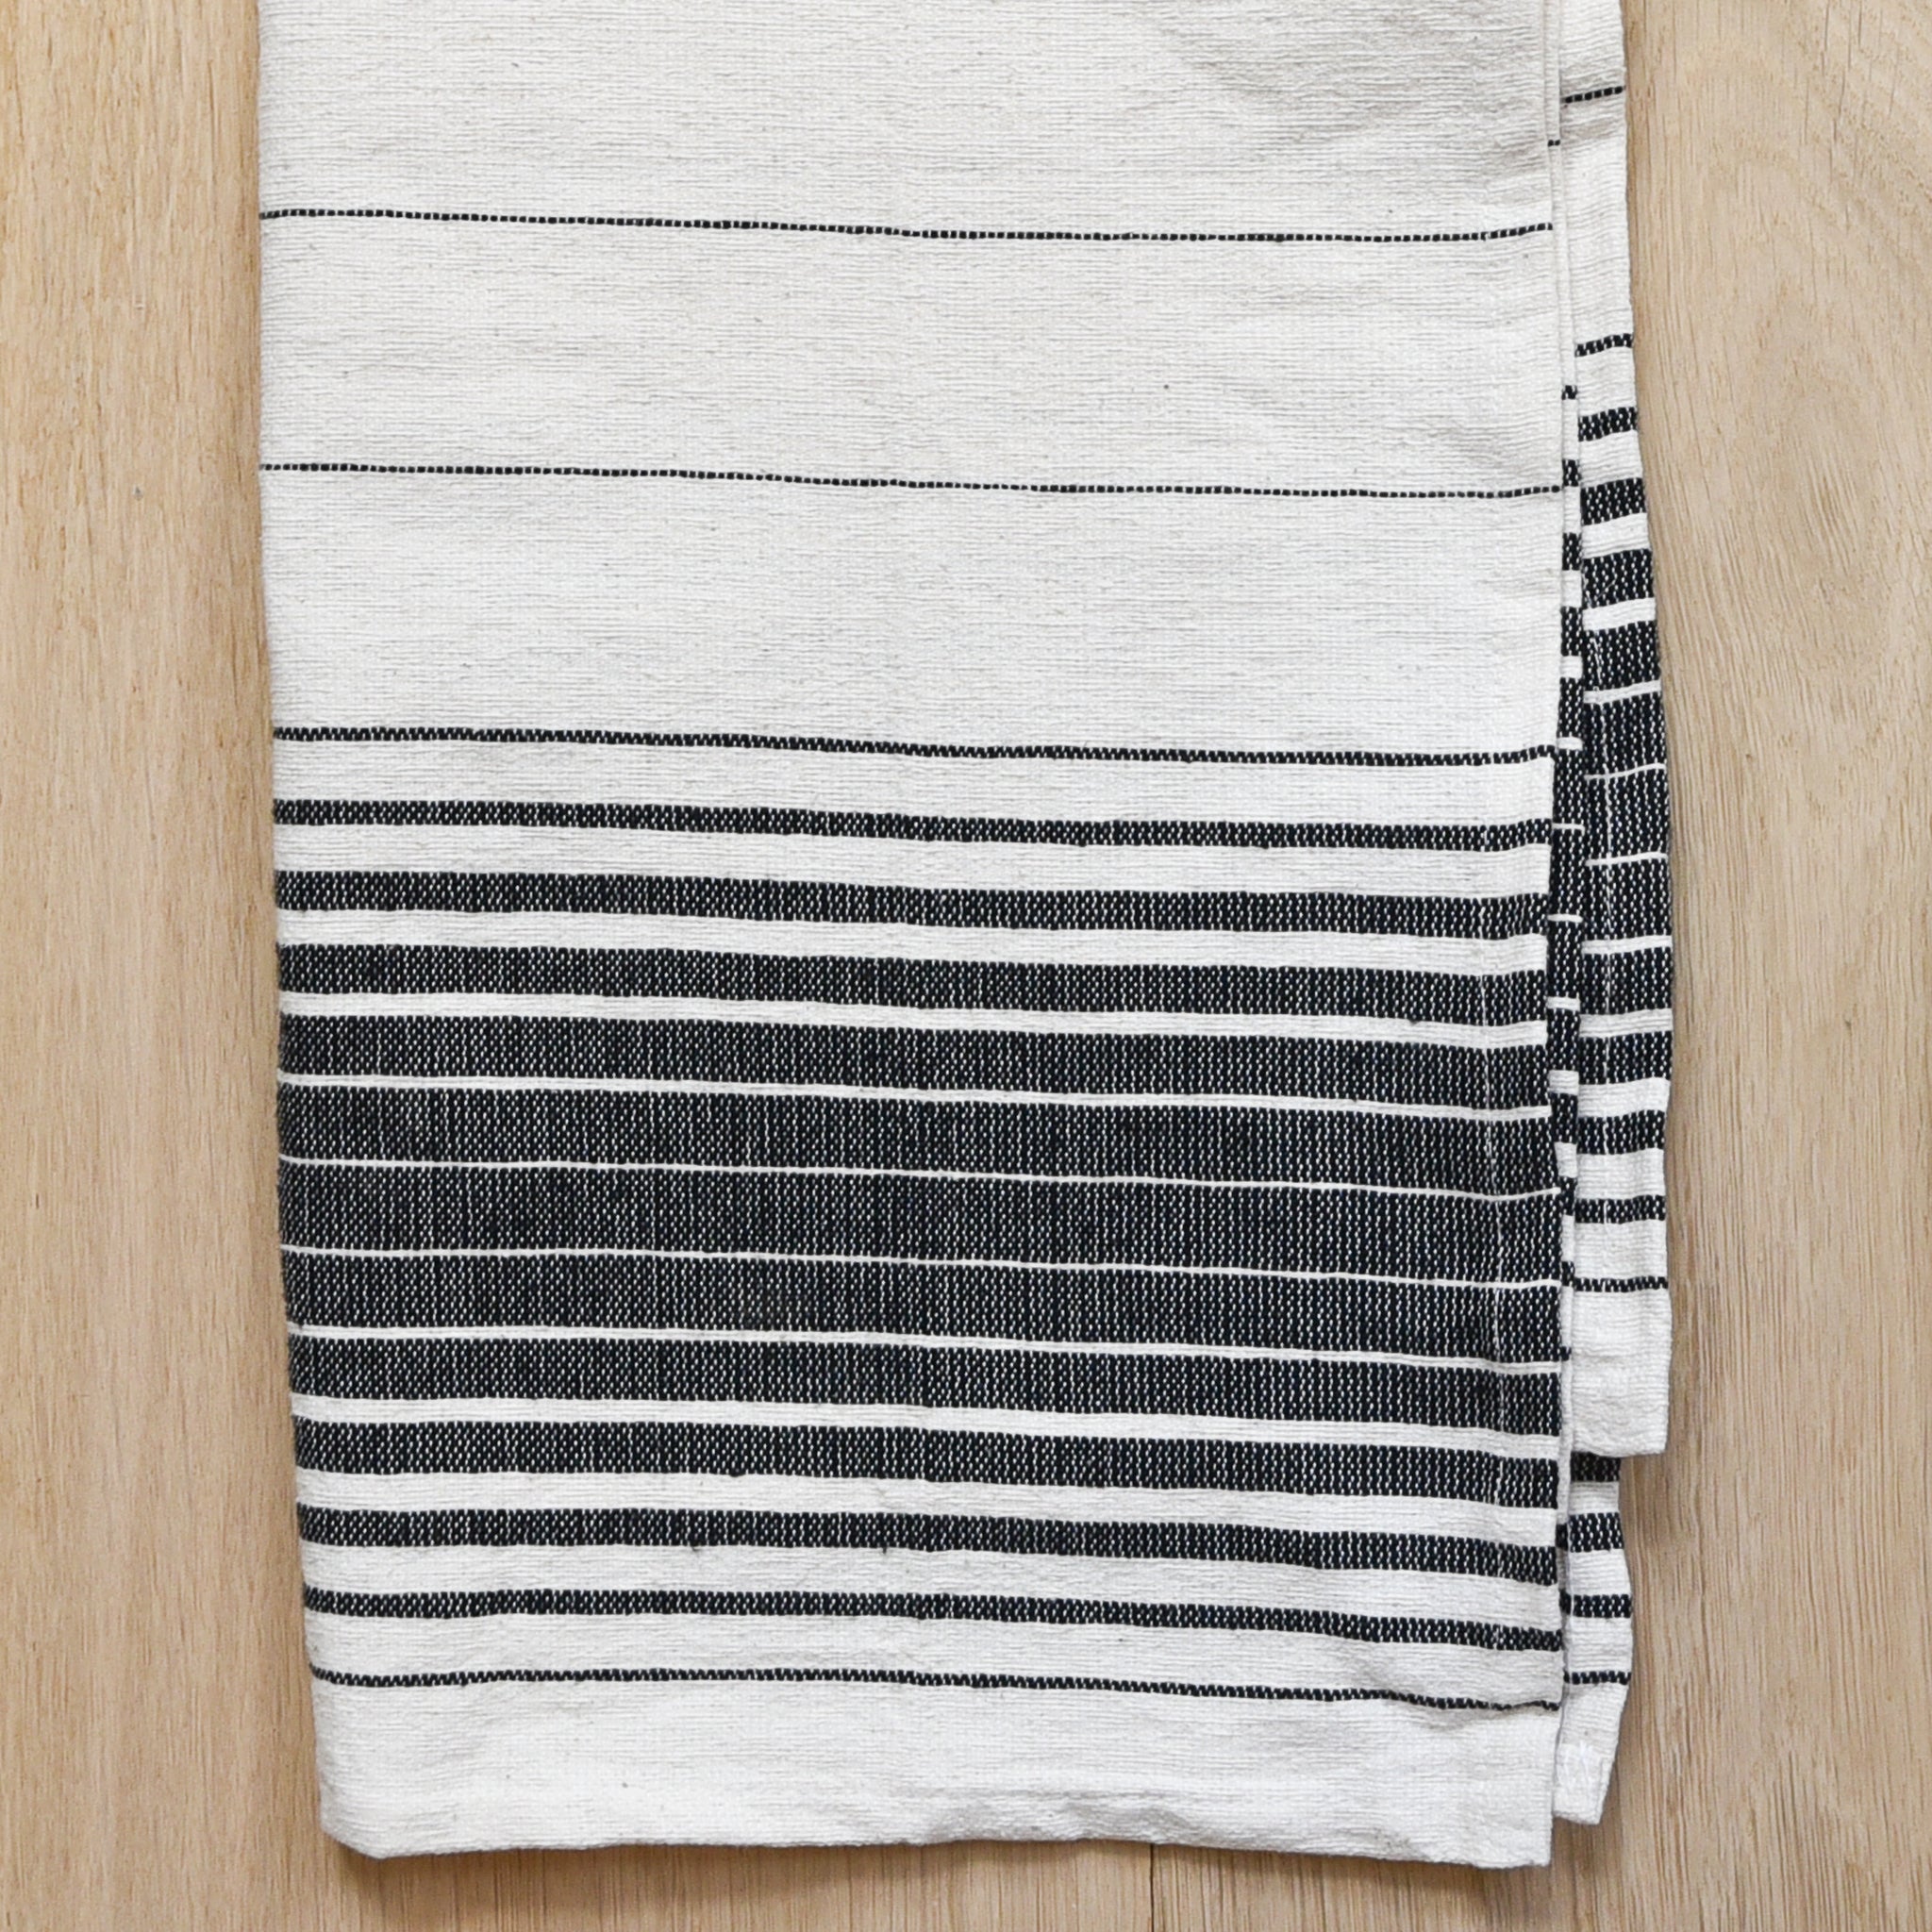 A black and ivory kitchen towel on a light wood table.